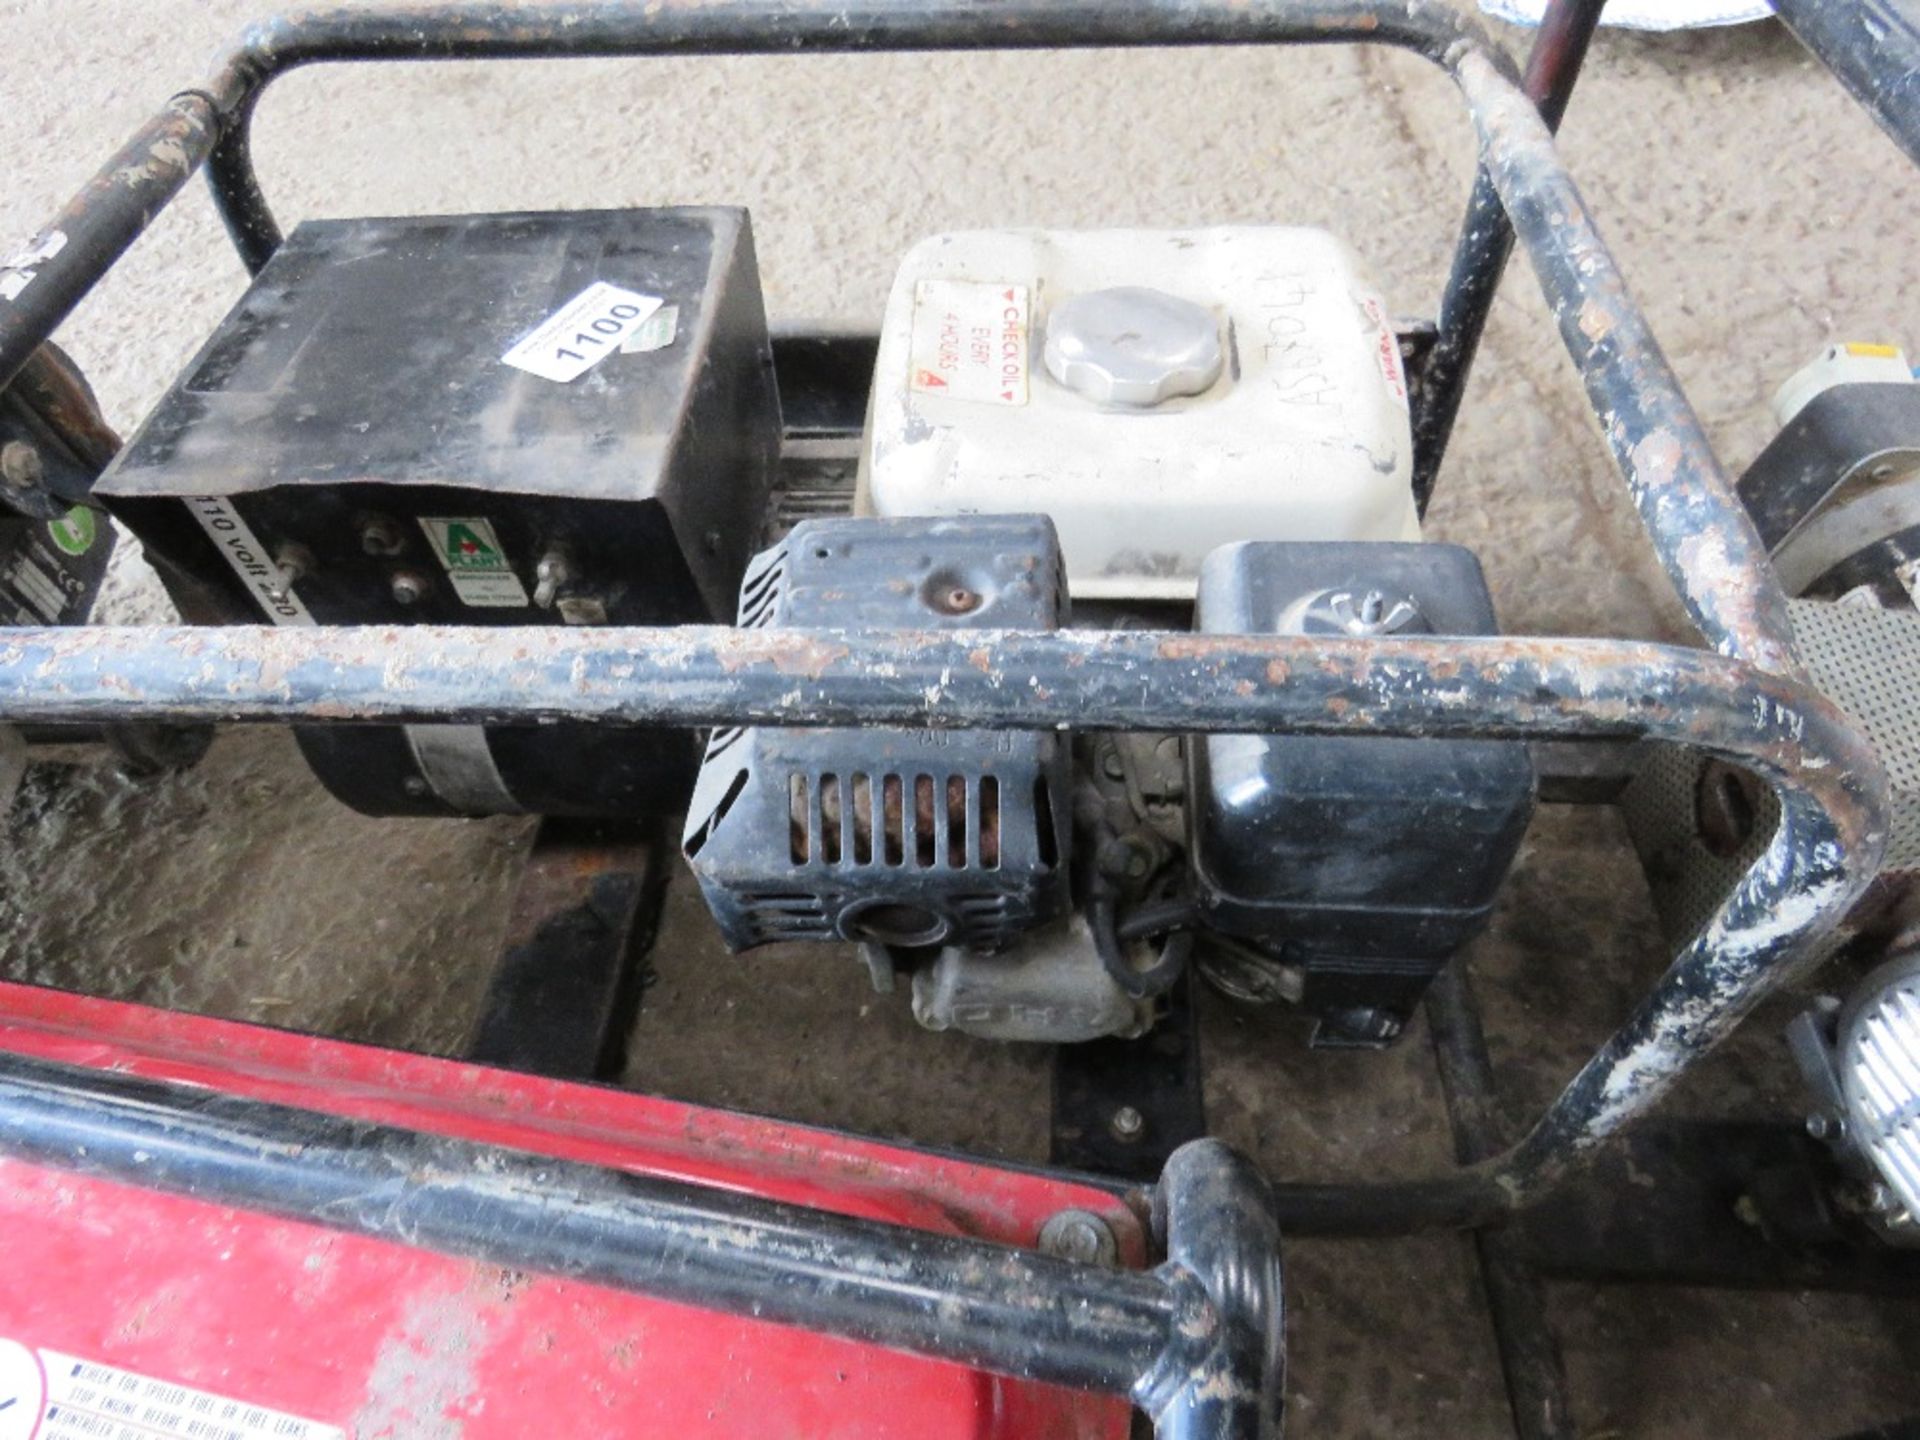 PETROL ENGINED GENERATOR, CONDITION UNKNOWN. DIRECT FROM UTILITIES CONTRACTOR. - Image 3 of 3